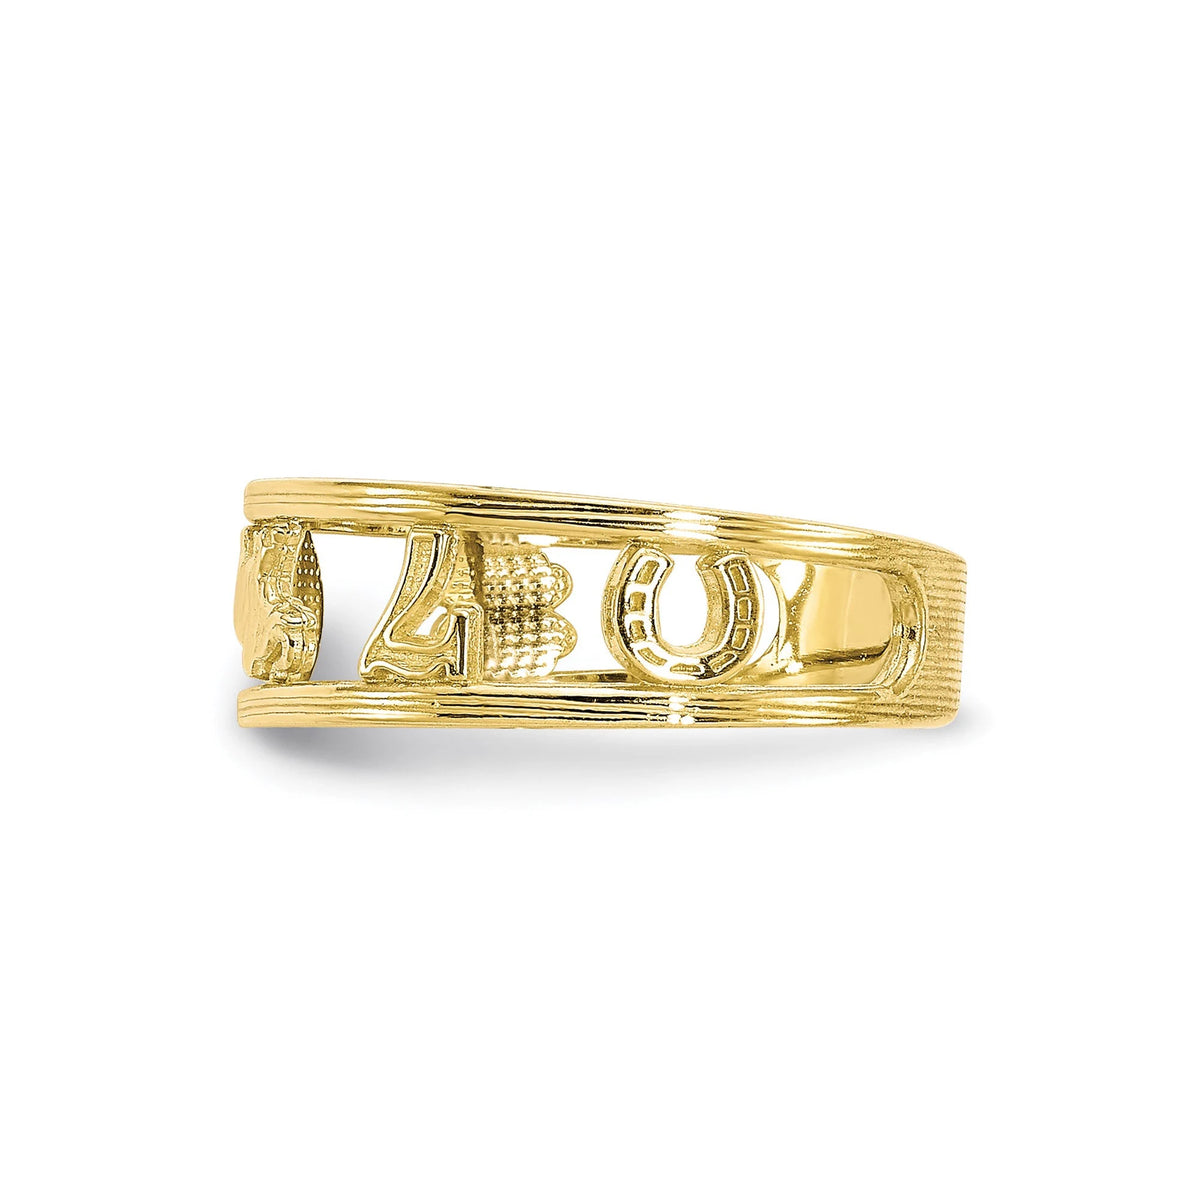 10k Lucky Yellow Gold Solid Toe Ring 5mm Band- Gift Box Included - Made in USA - All Things Lucky Toe Ring